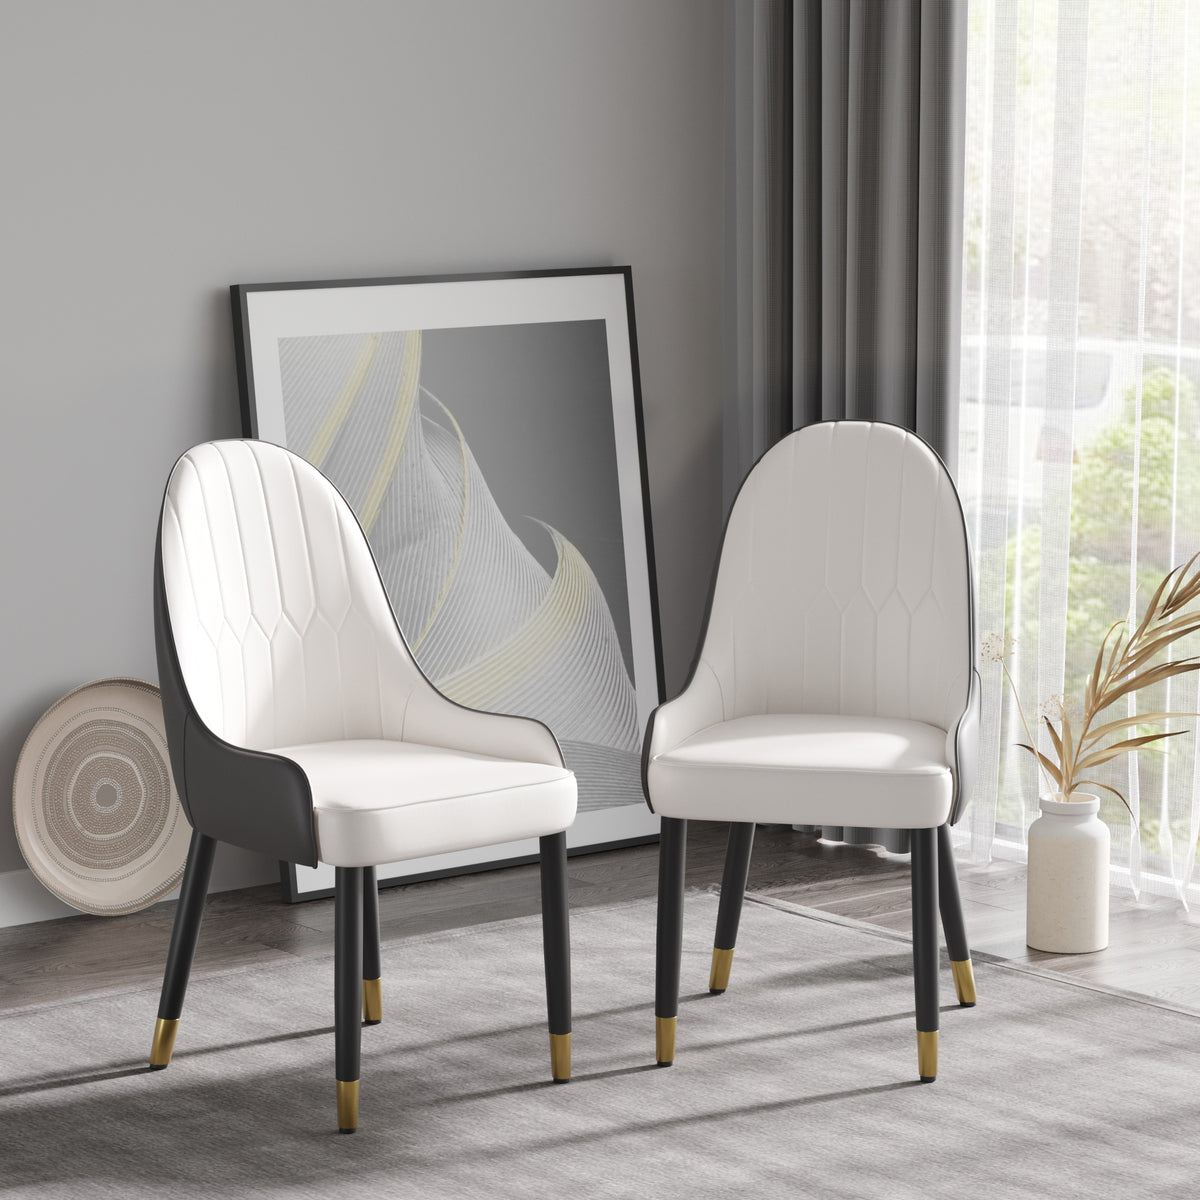 Modern Solid Wood Metal Legs Dining Chairs (Set of 2) - White and Black